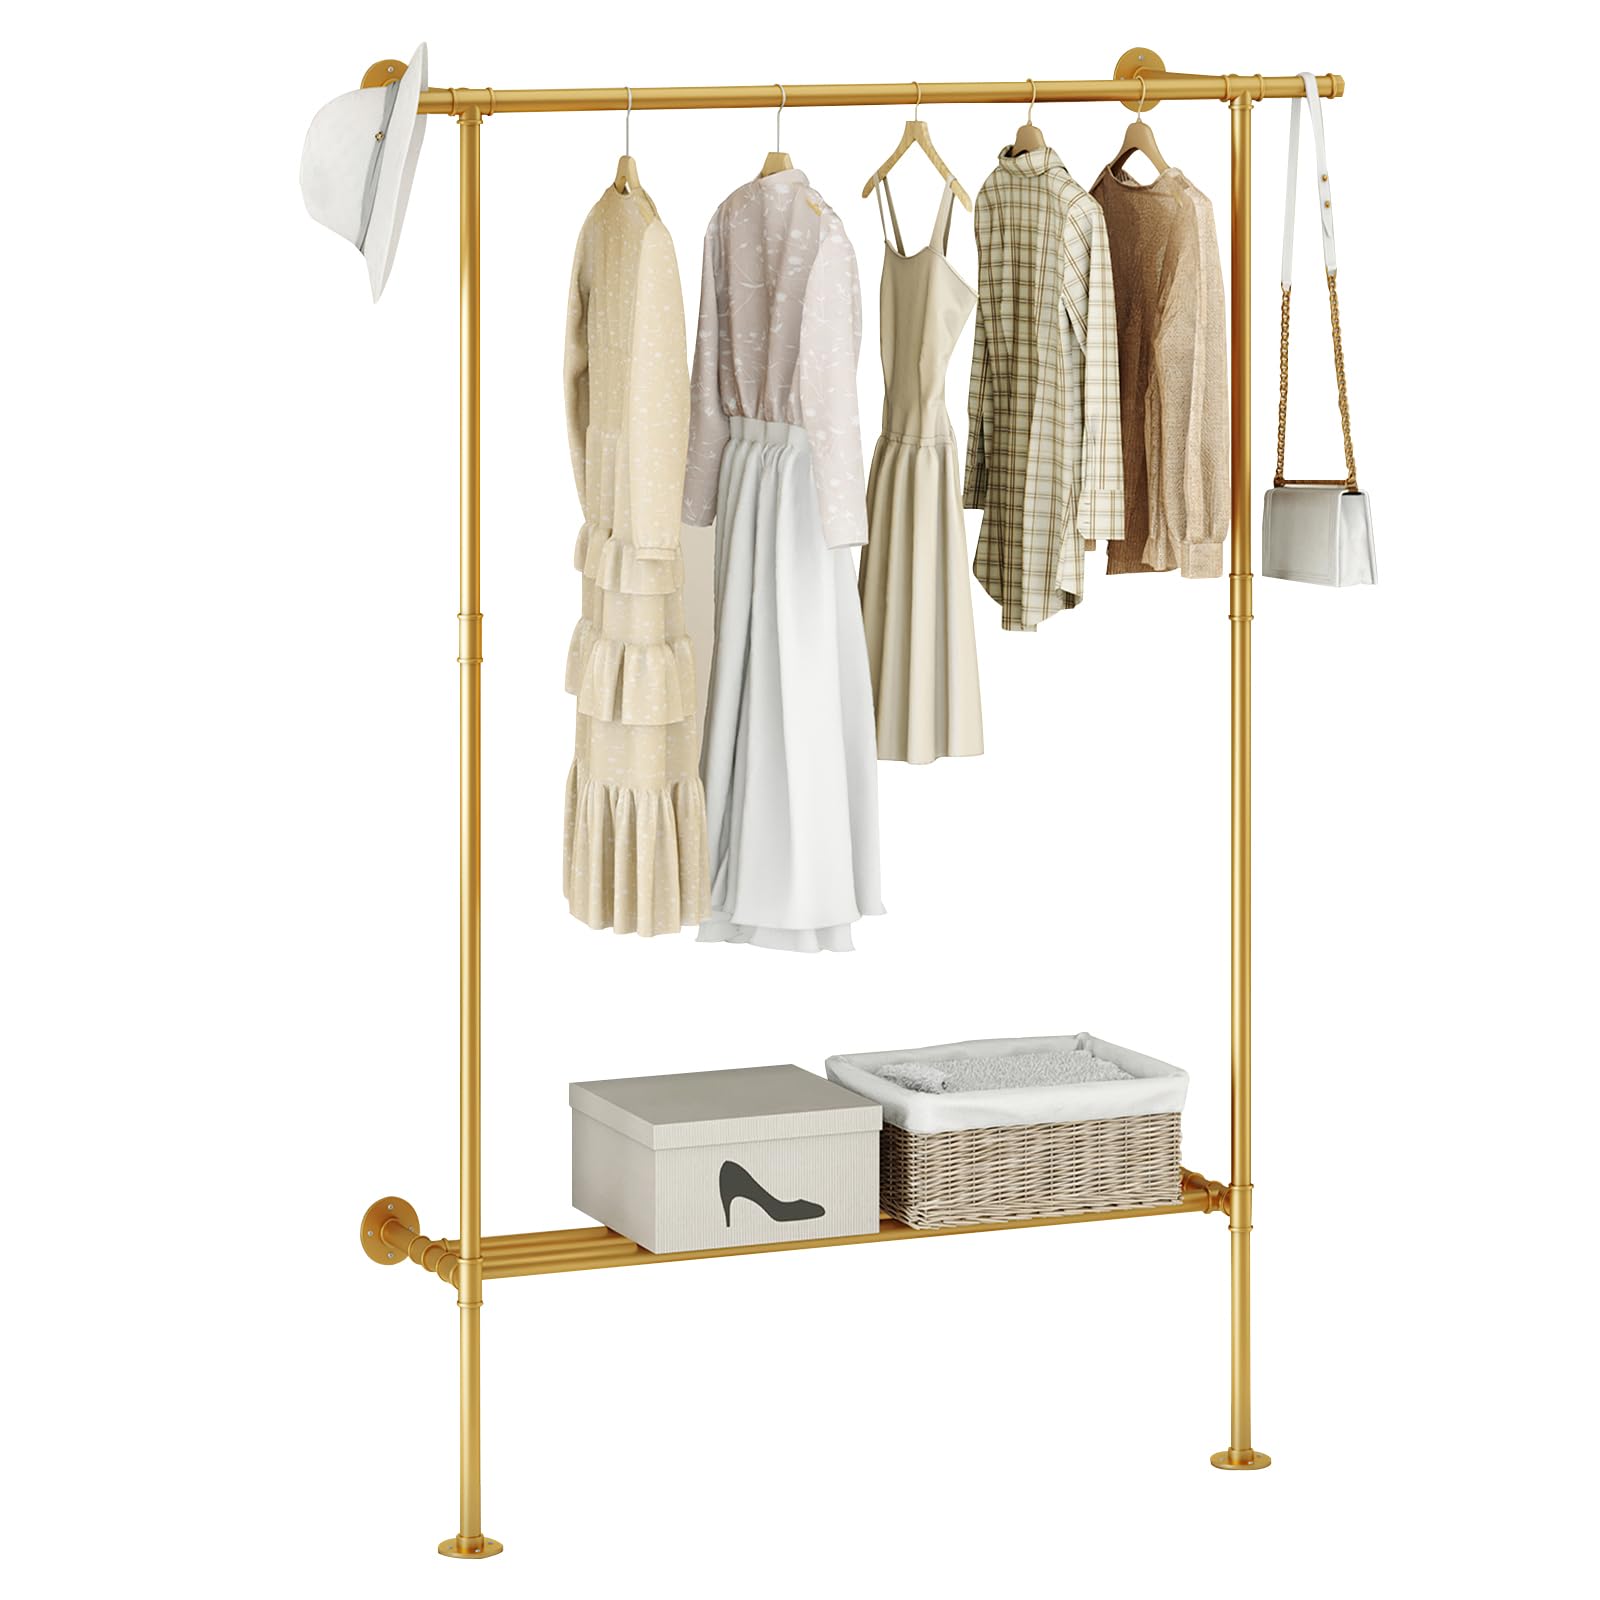 FJANKUI Gold Wall Mounted industrial pipe clothes rack with Shelf, clothing rack Rod for Closet and Walk-in Closet Systems, Mult